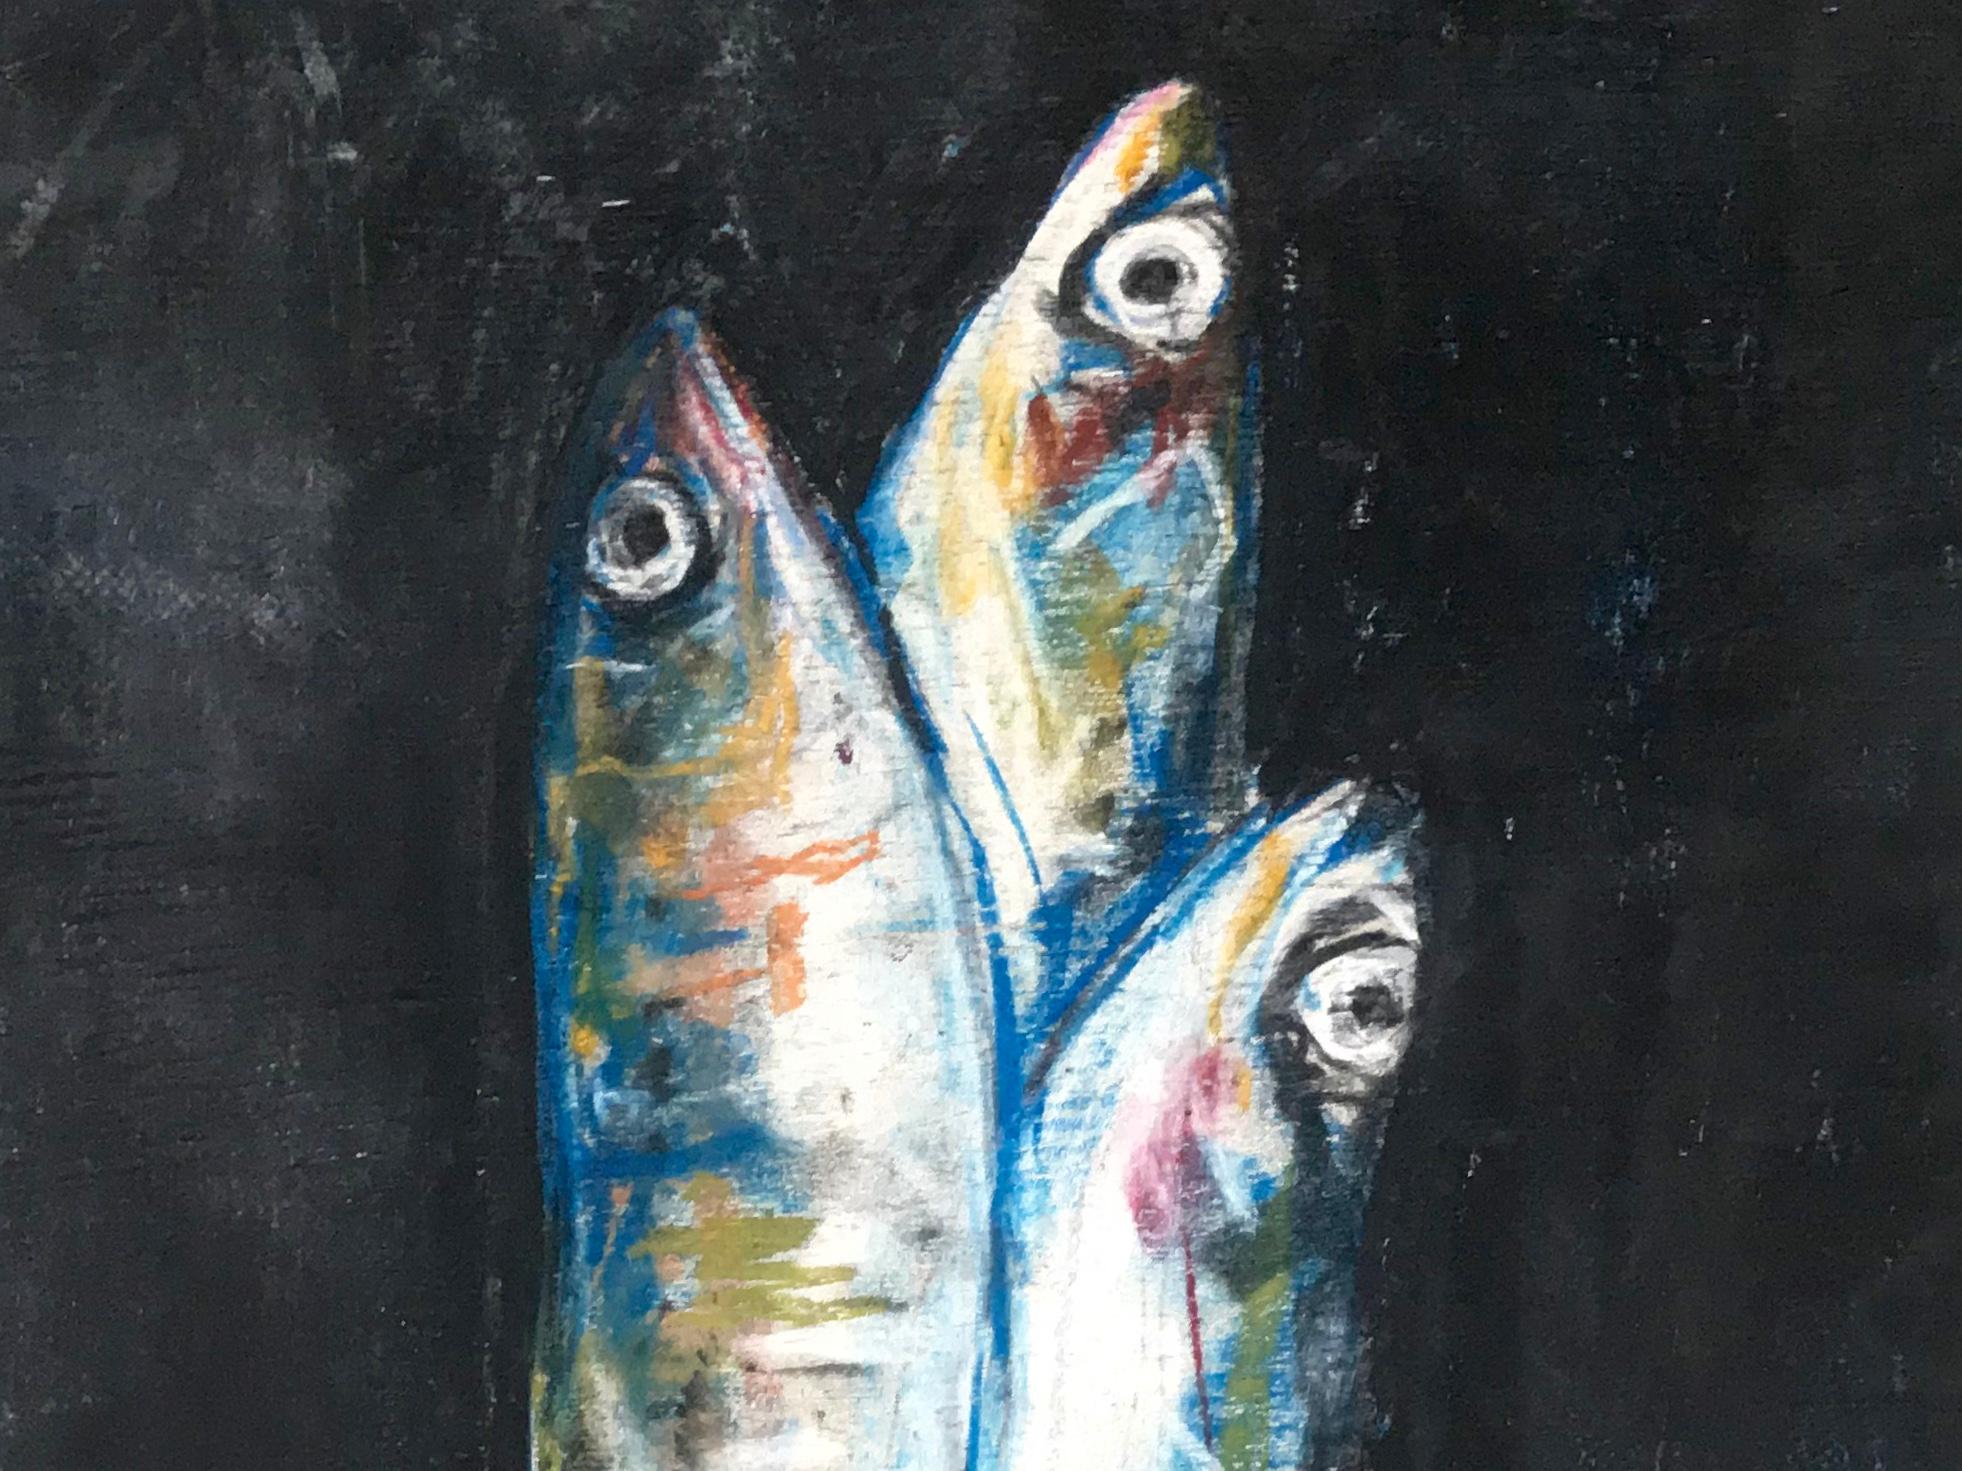 Sardine Colazione fish painting. Contemporary blue white and green on black gesso painting on wood panel of breakfast sardines, Italy, 2019. 
Dimension: 11.75